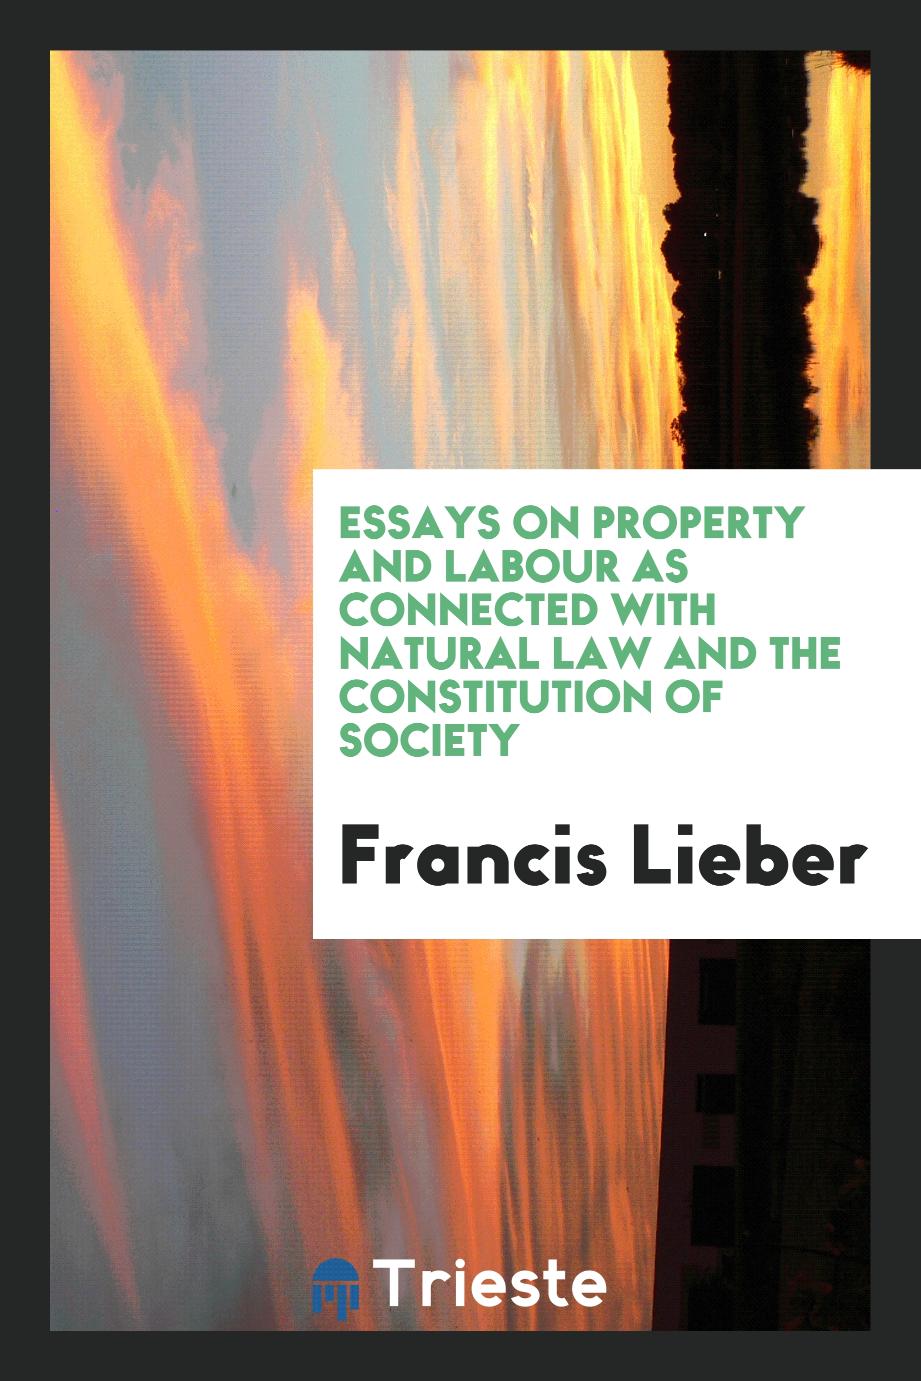 Essays on property and labour as connected with natural law and the constitution of society